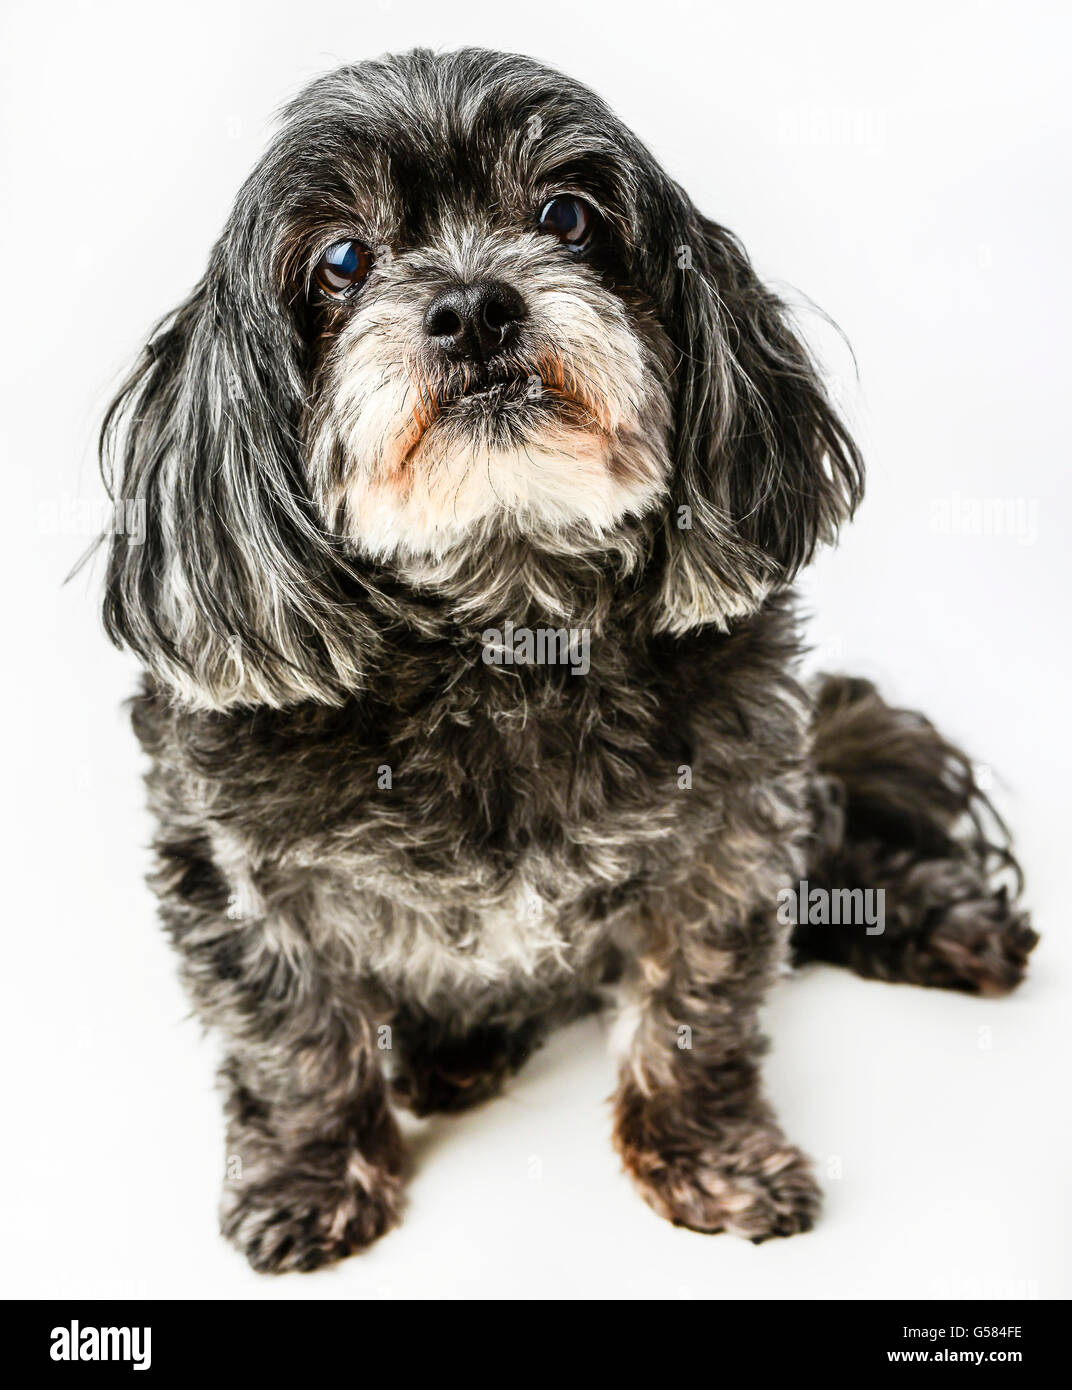 An adorable dark tri-colored mixed breed small dog posing with curious expression on white background Stock Photo